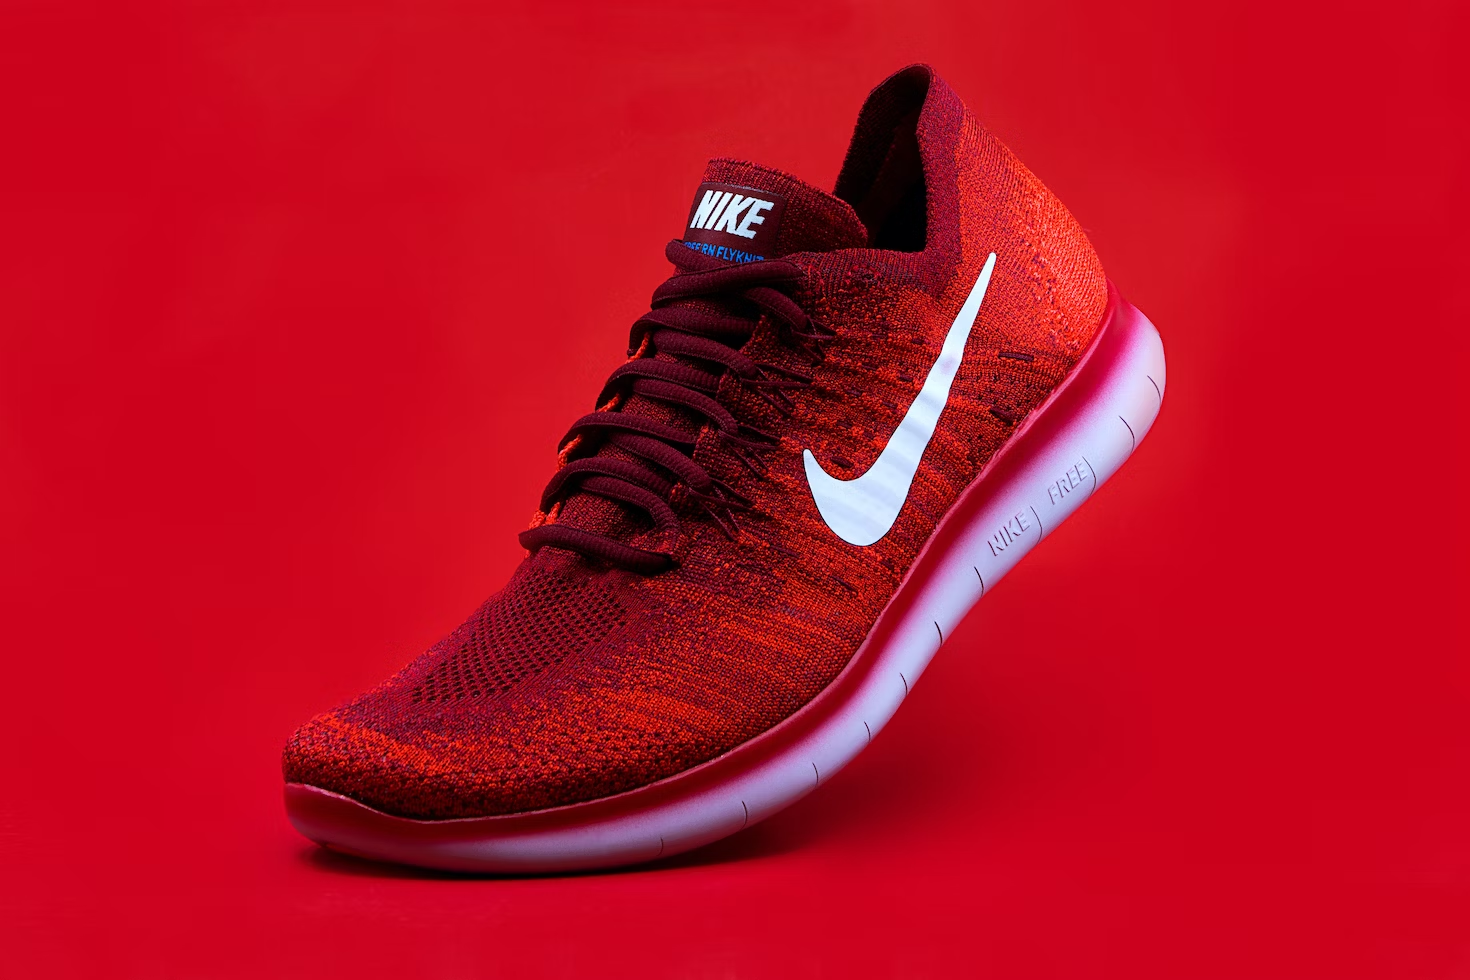 A red Nike Free running shoe against a red background. The shoe has a low-top design with a knit upper that appears to offer breathability and flexibility.